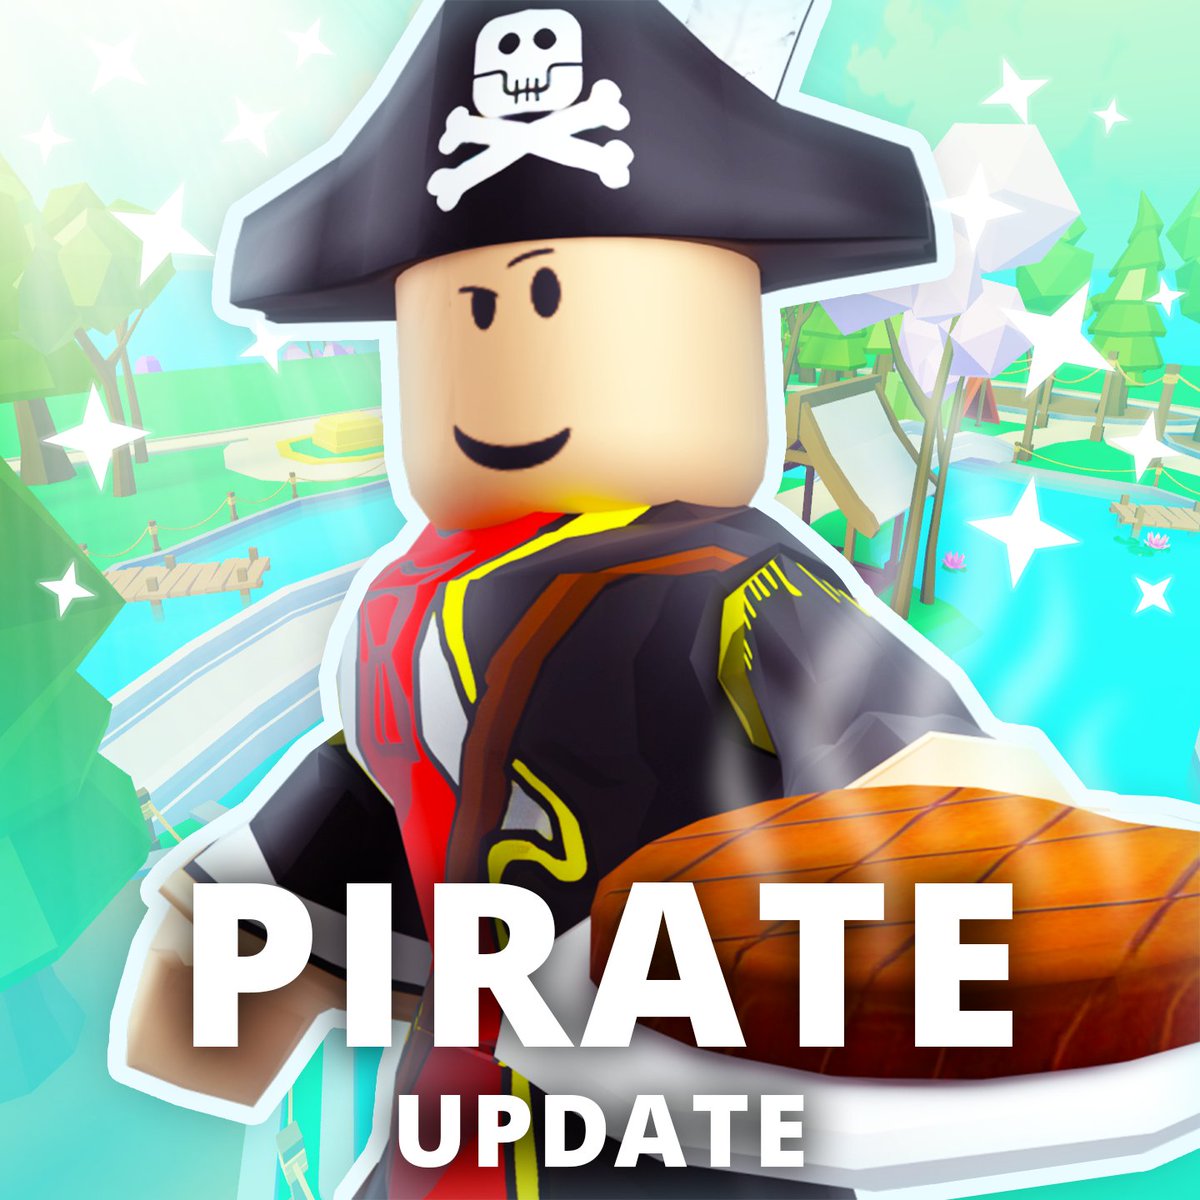 Big Games On Twitter Hurry And Grab The Limited Items Before They Are Gone Selling Super Fast Right Now - hurry limited robux 1